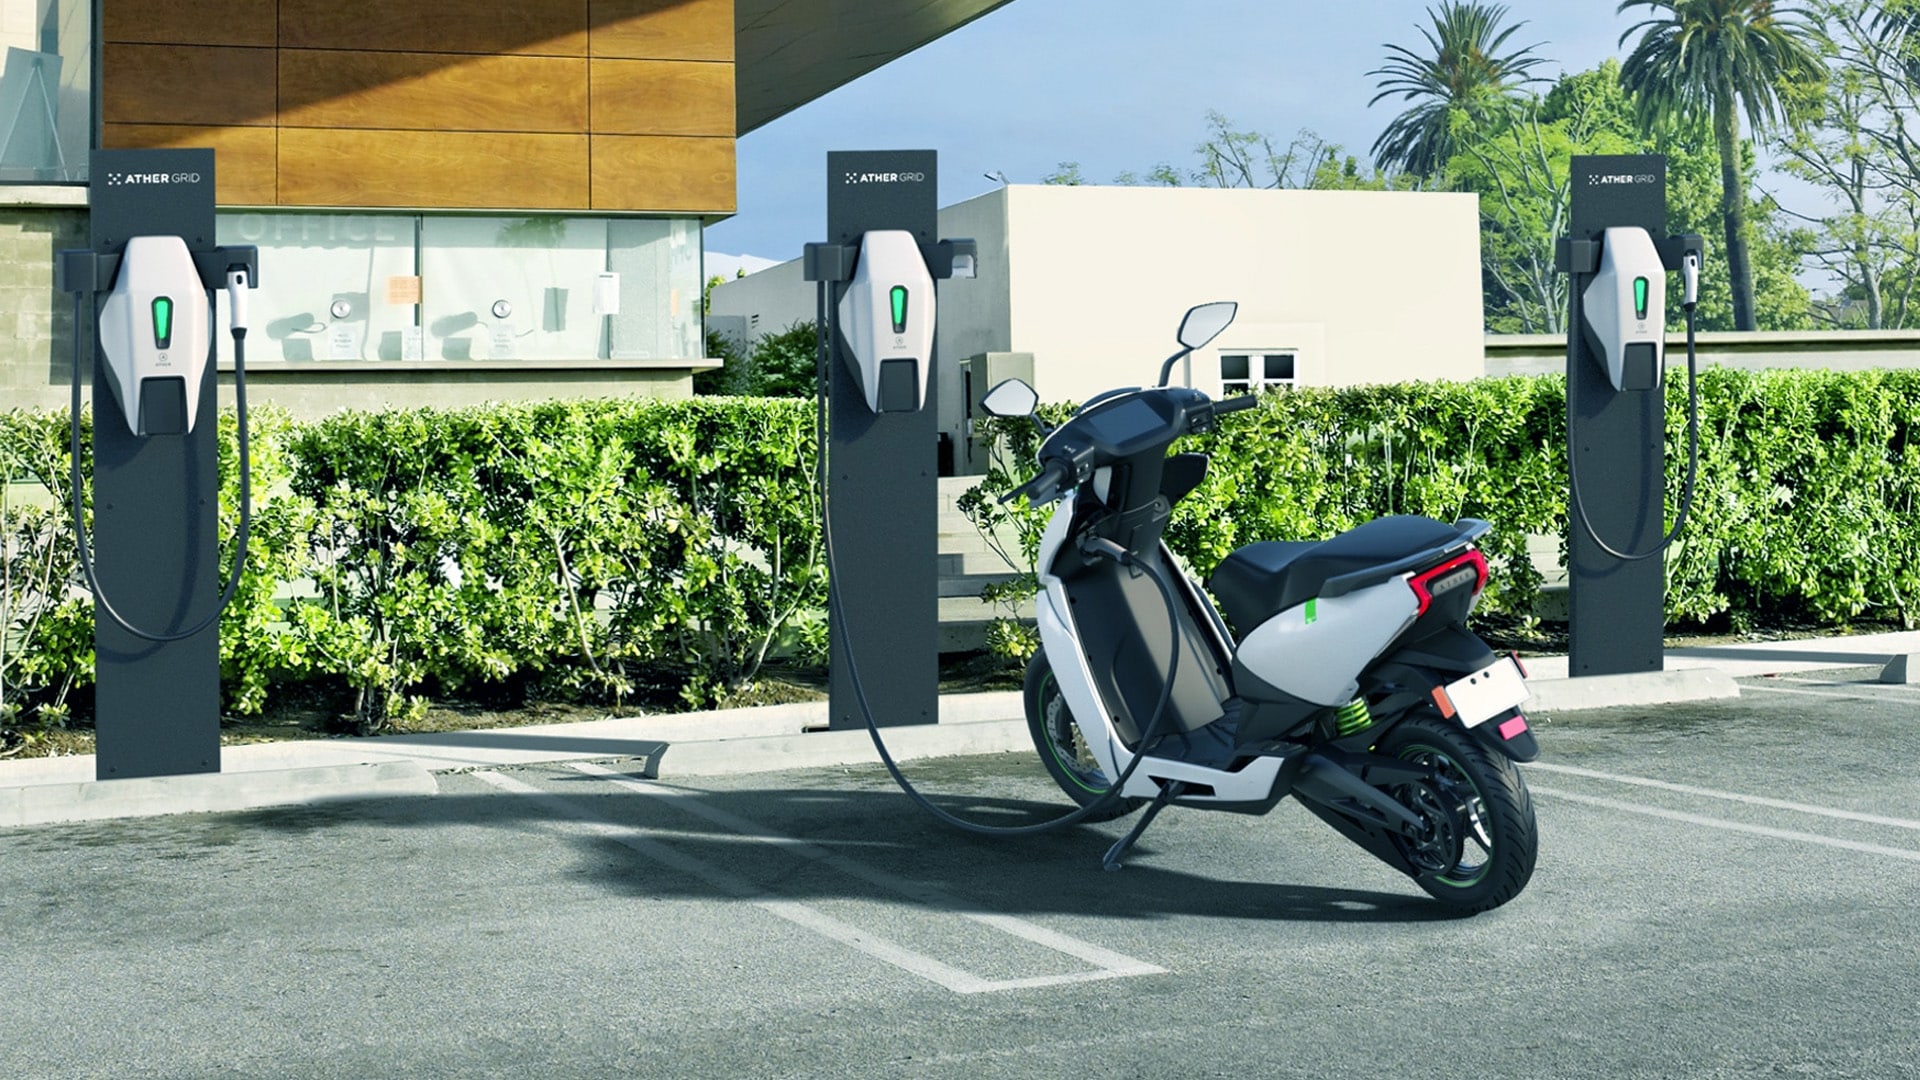 Ather Energy ties up with Park+ to sets up fast charging network in Mumbai